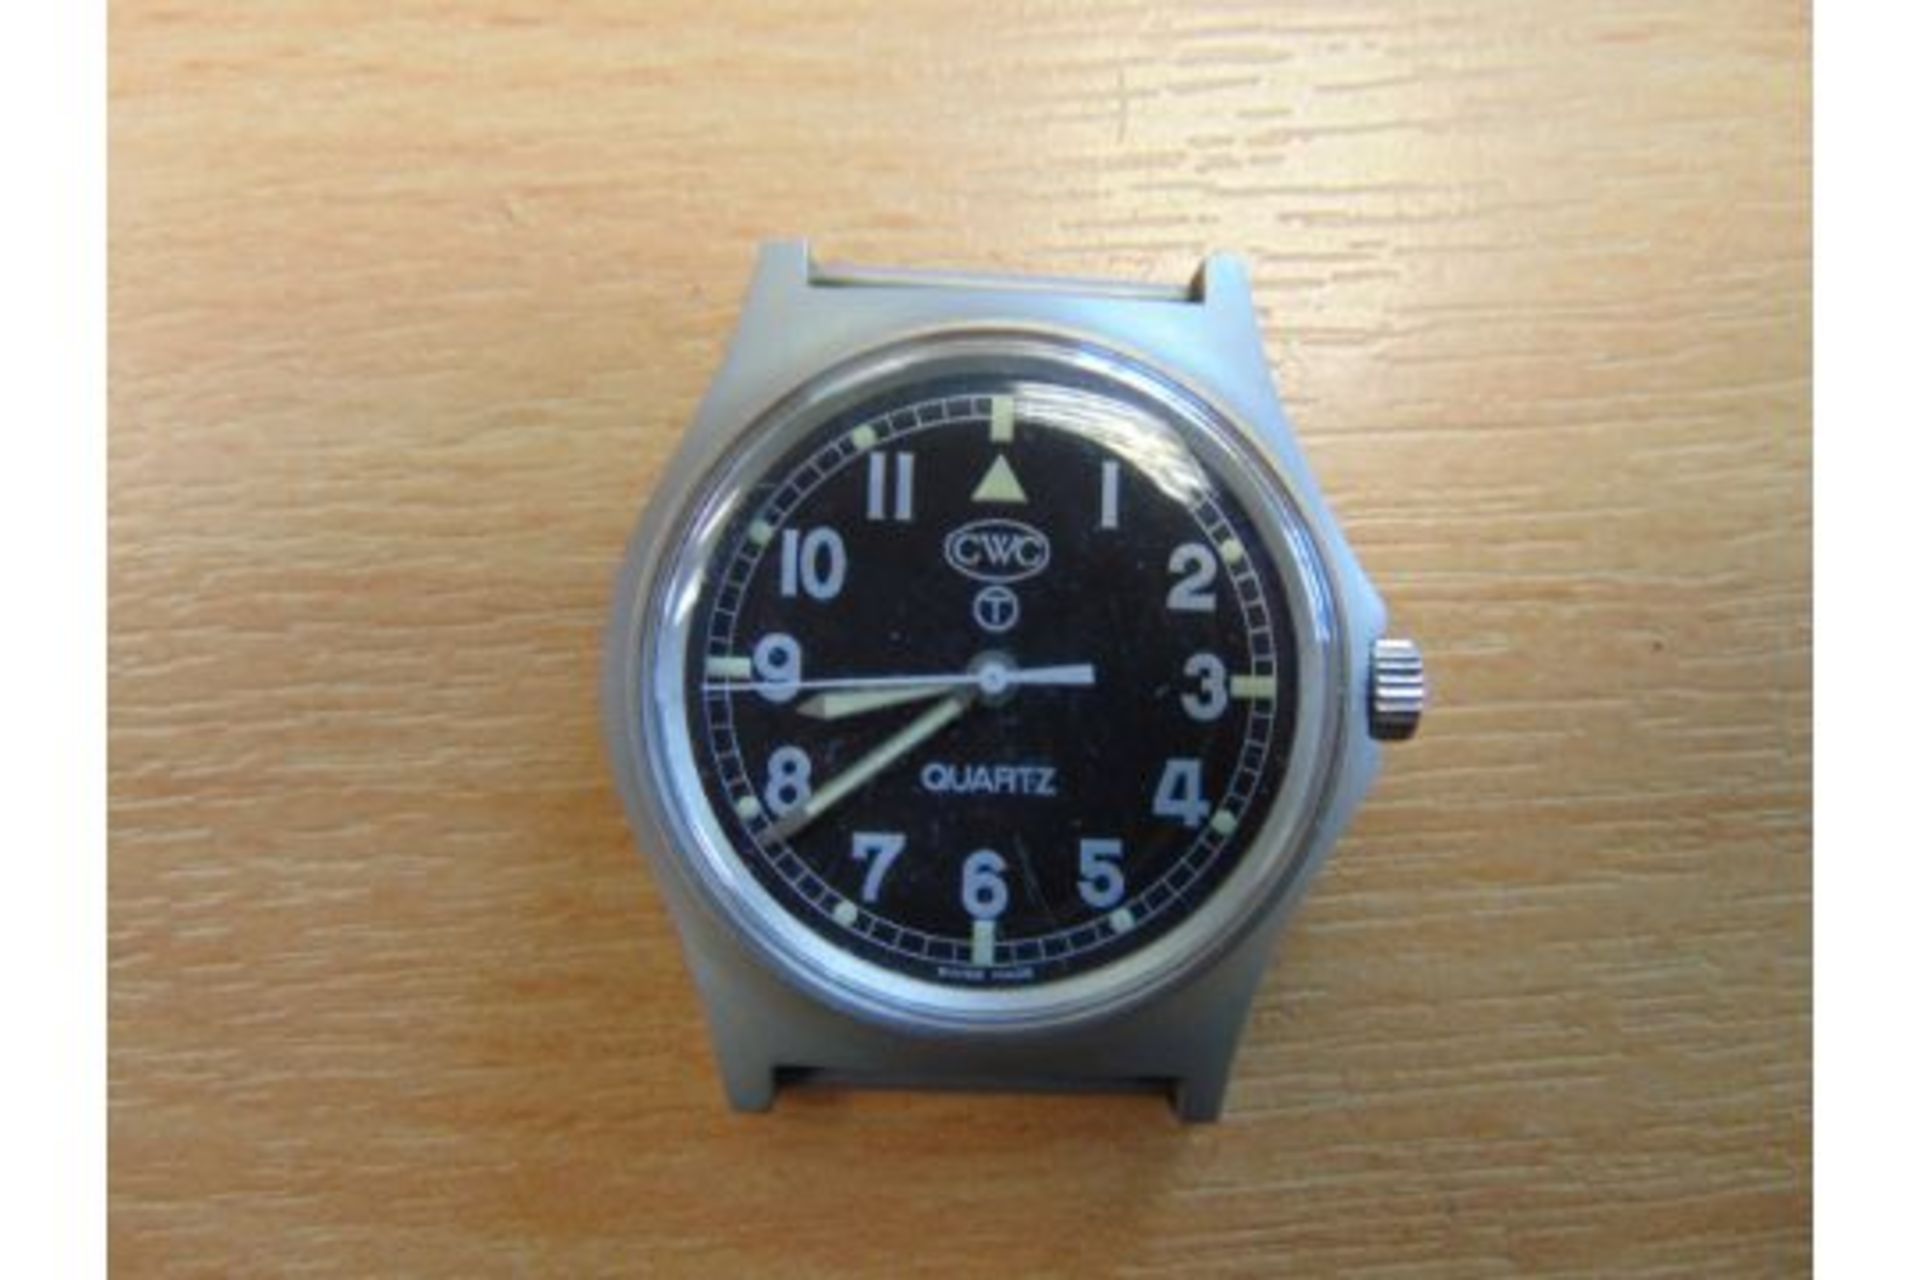 V Rare Unissued CWC (Cabot Watch Co Switzerland) 0552 Royal Marines / Navy Issue Service Watch 1990